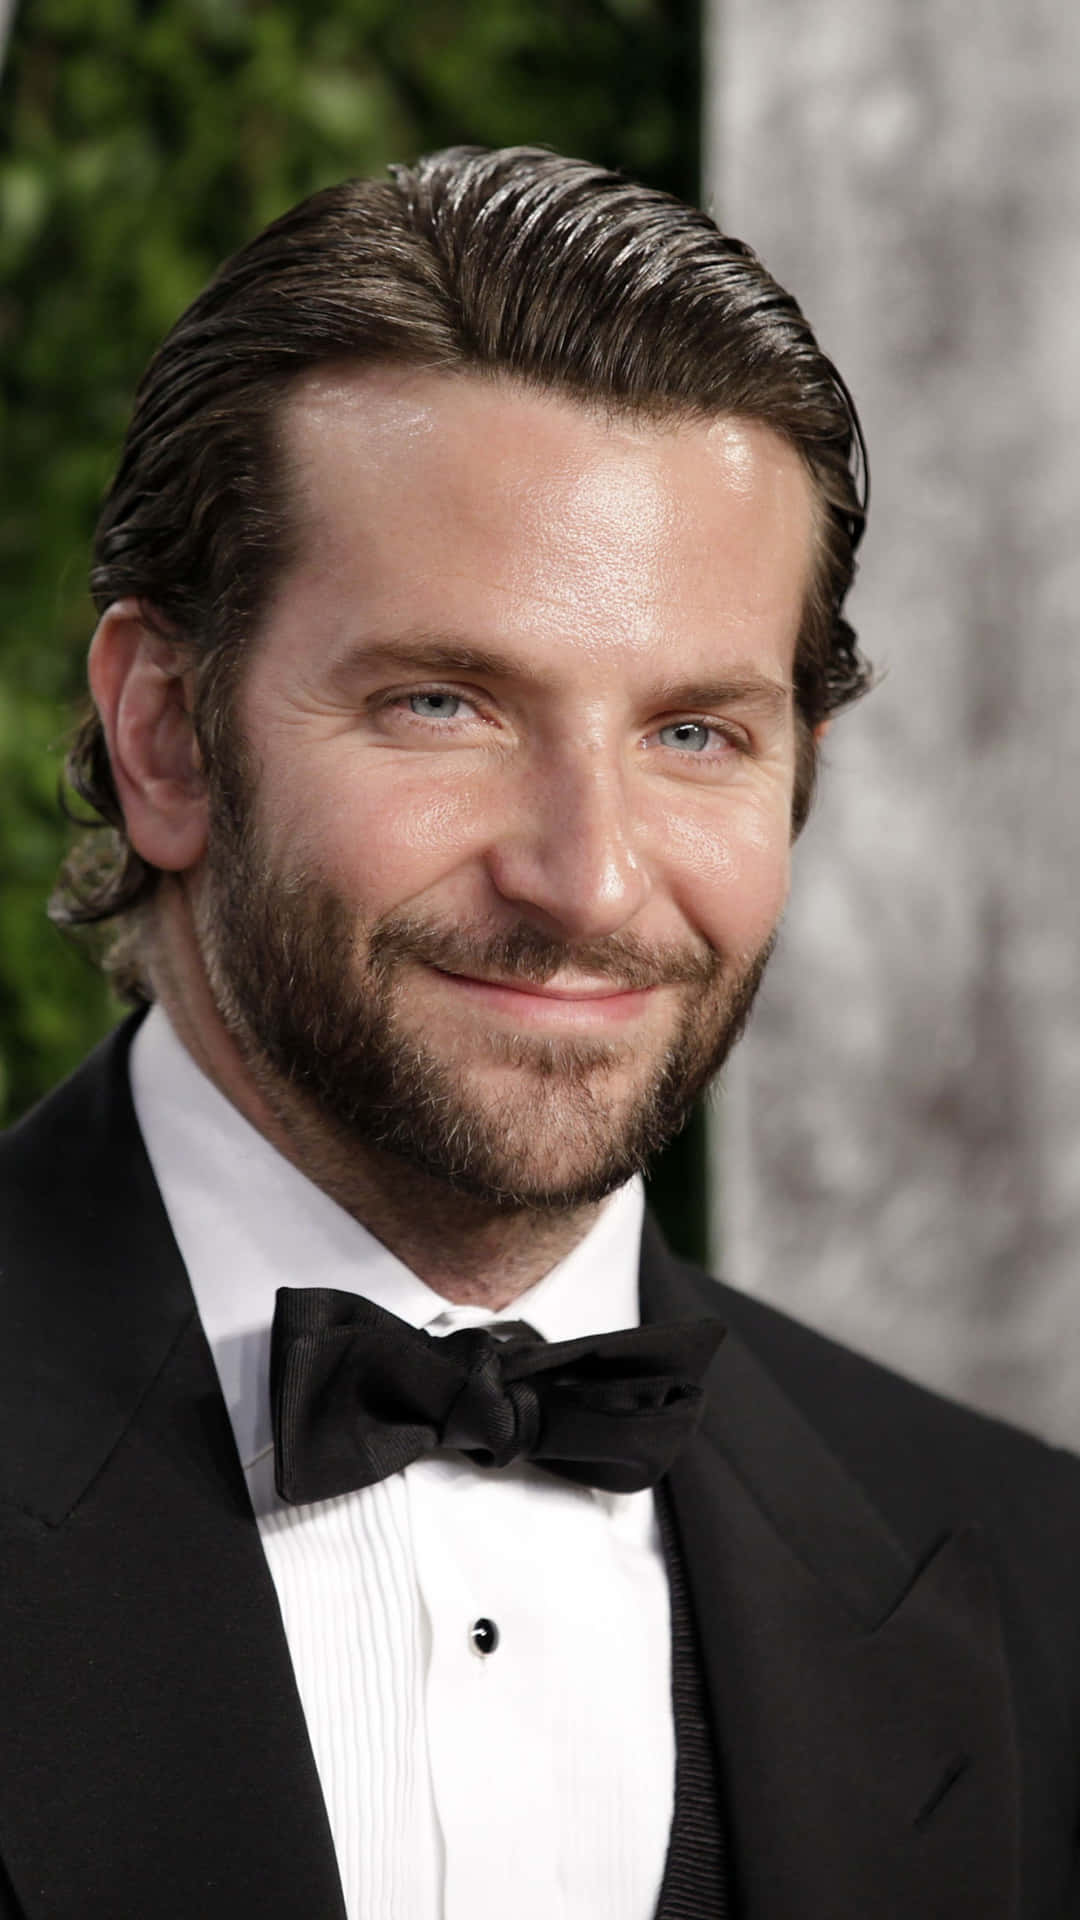 Bradley Cooper Looking Casual and Confident